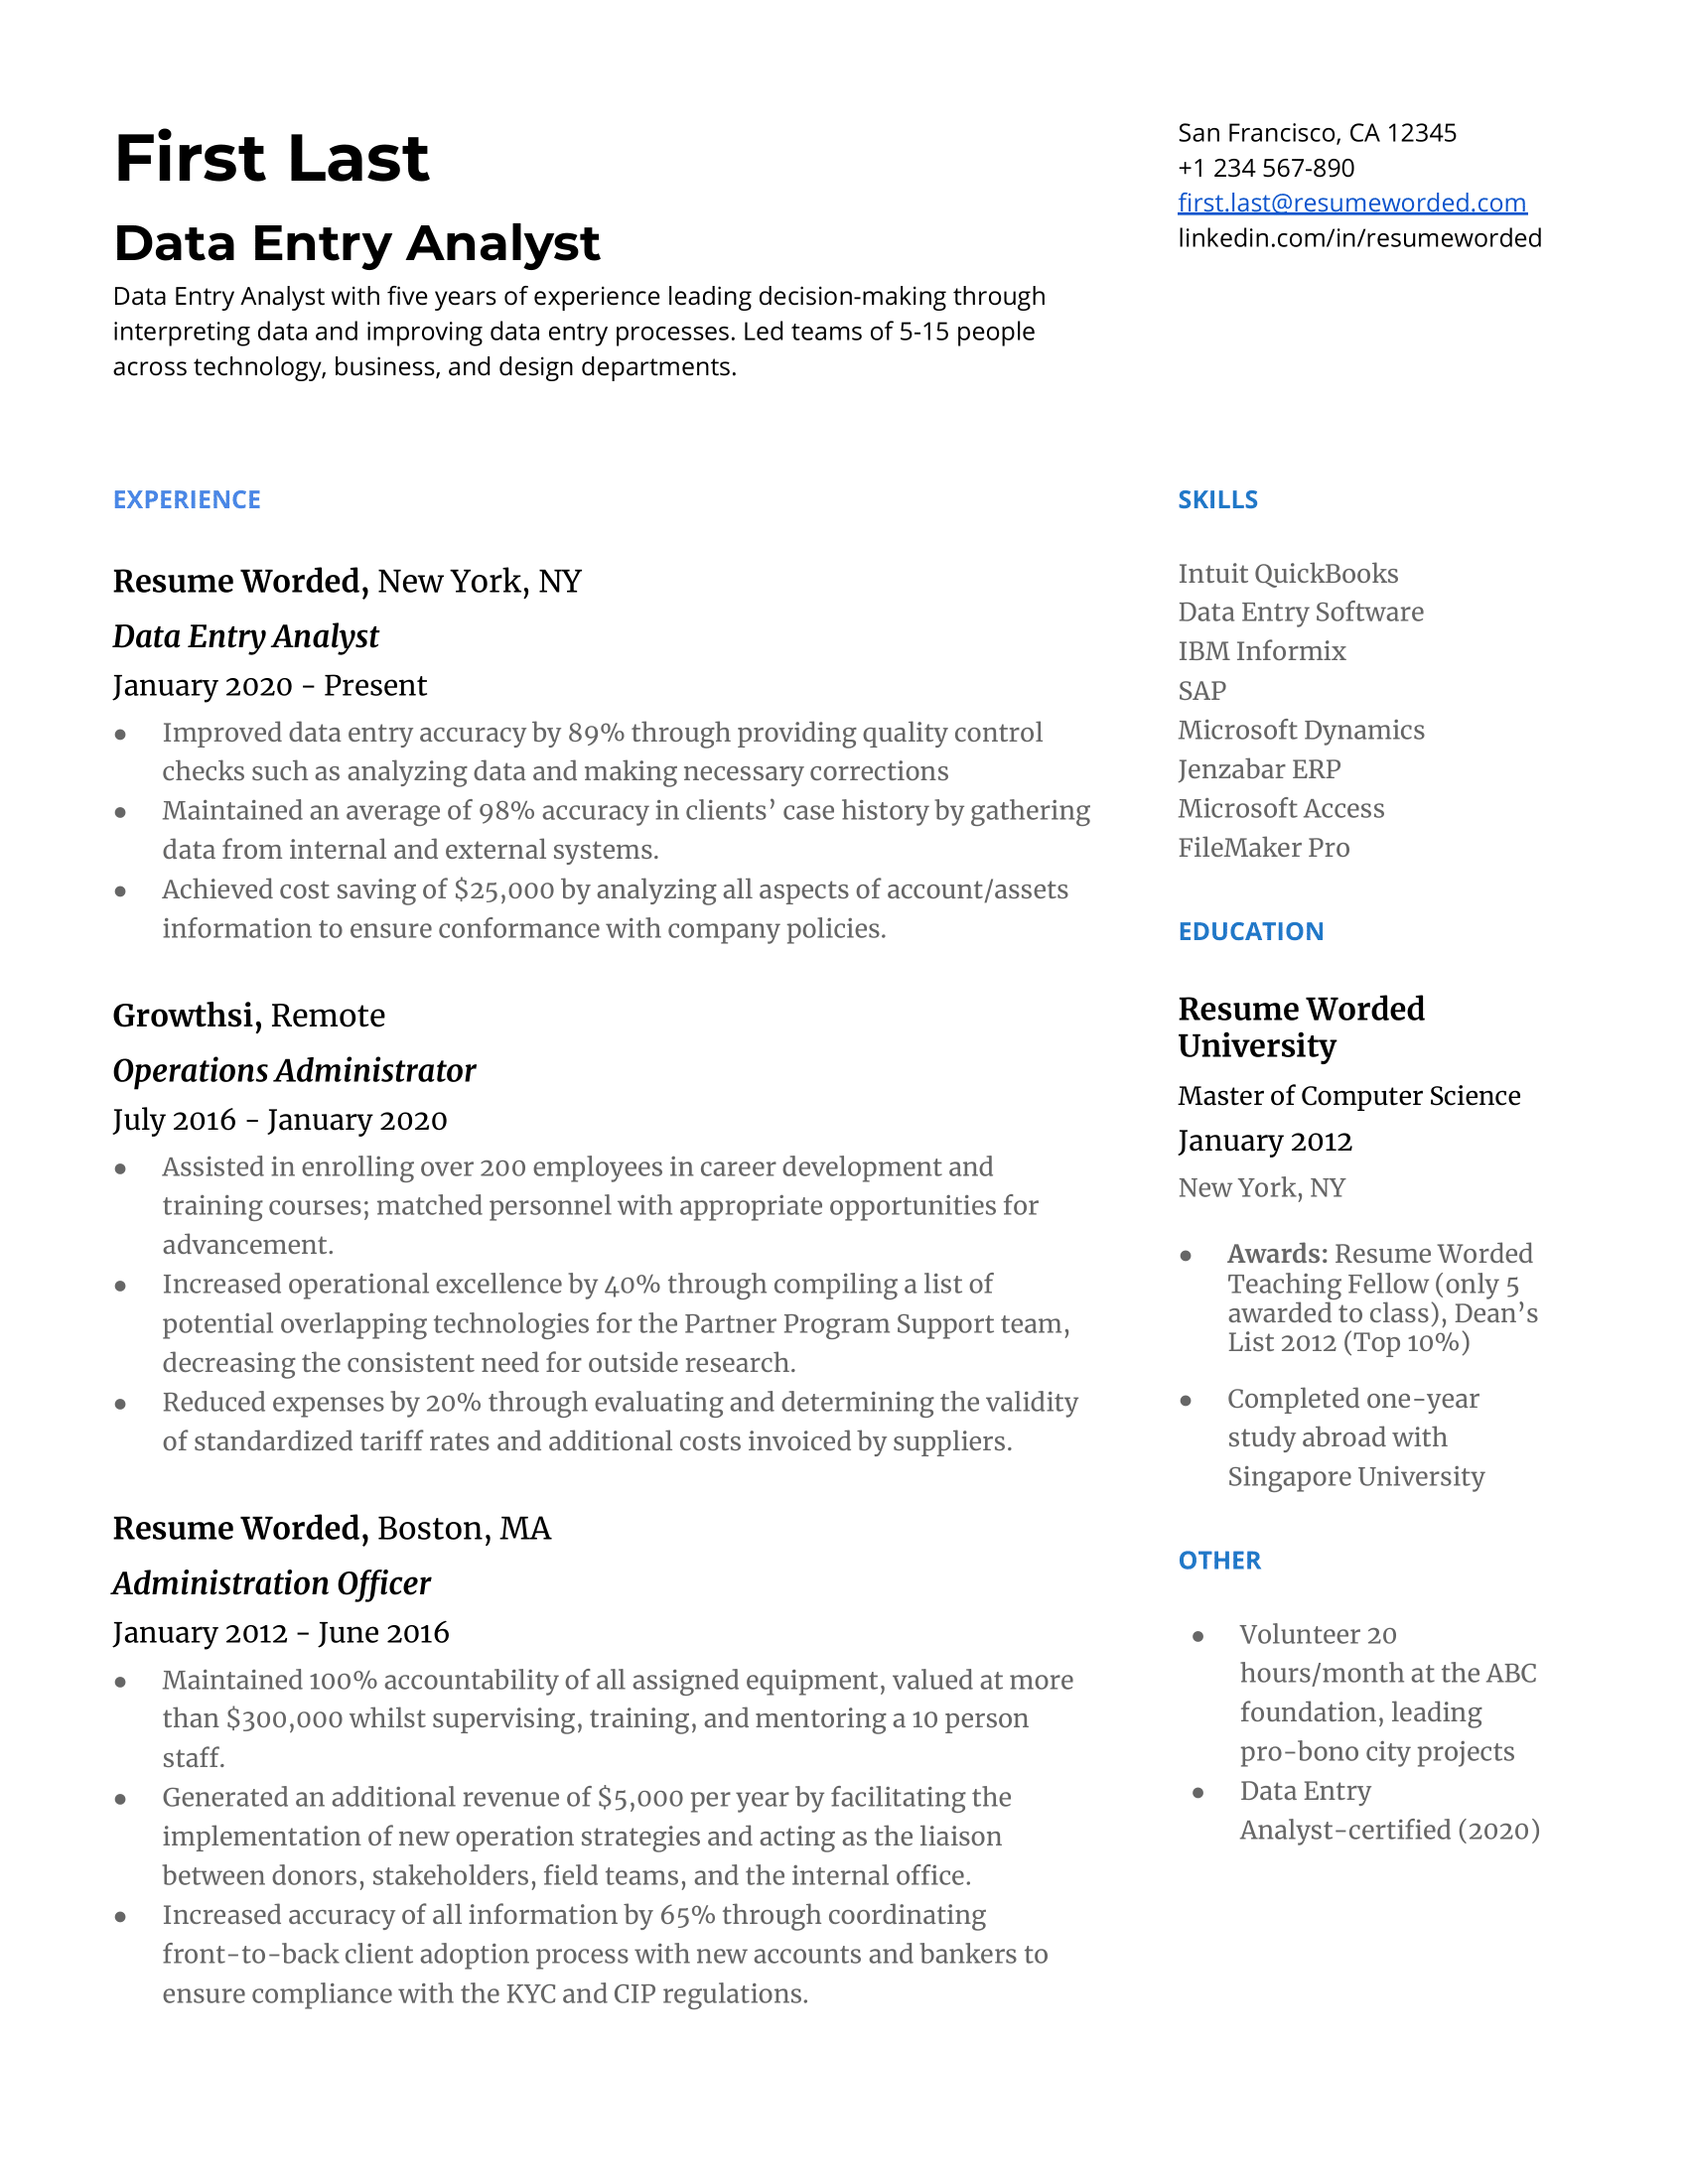 A screenshot of a CV tailored for a data entry analyst role.